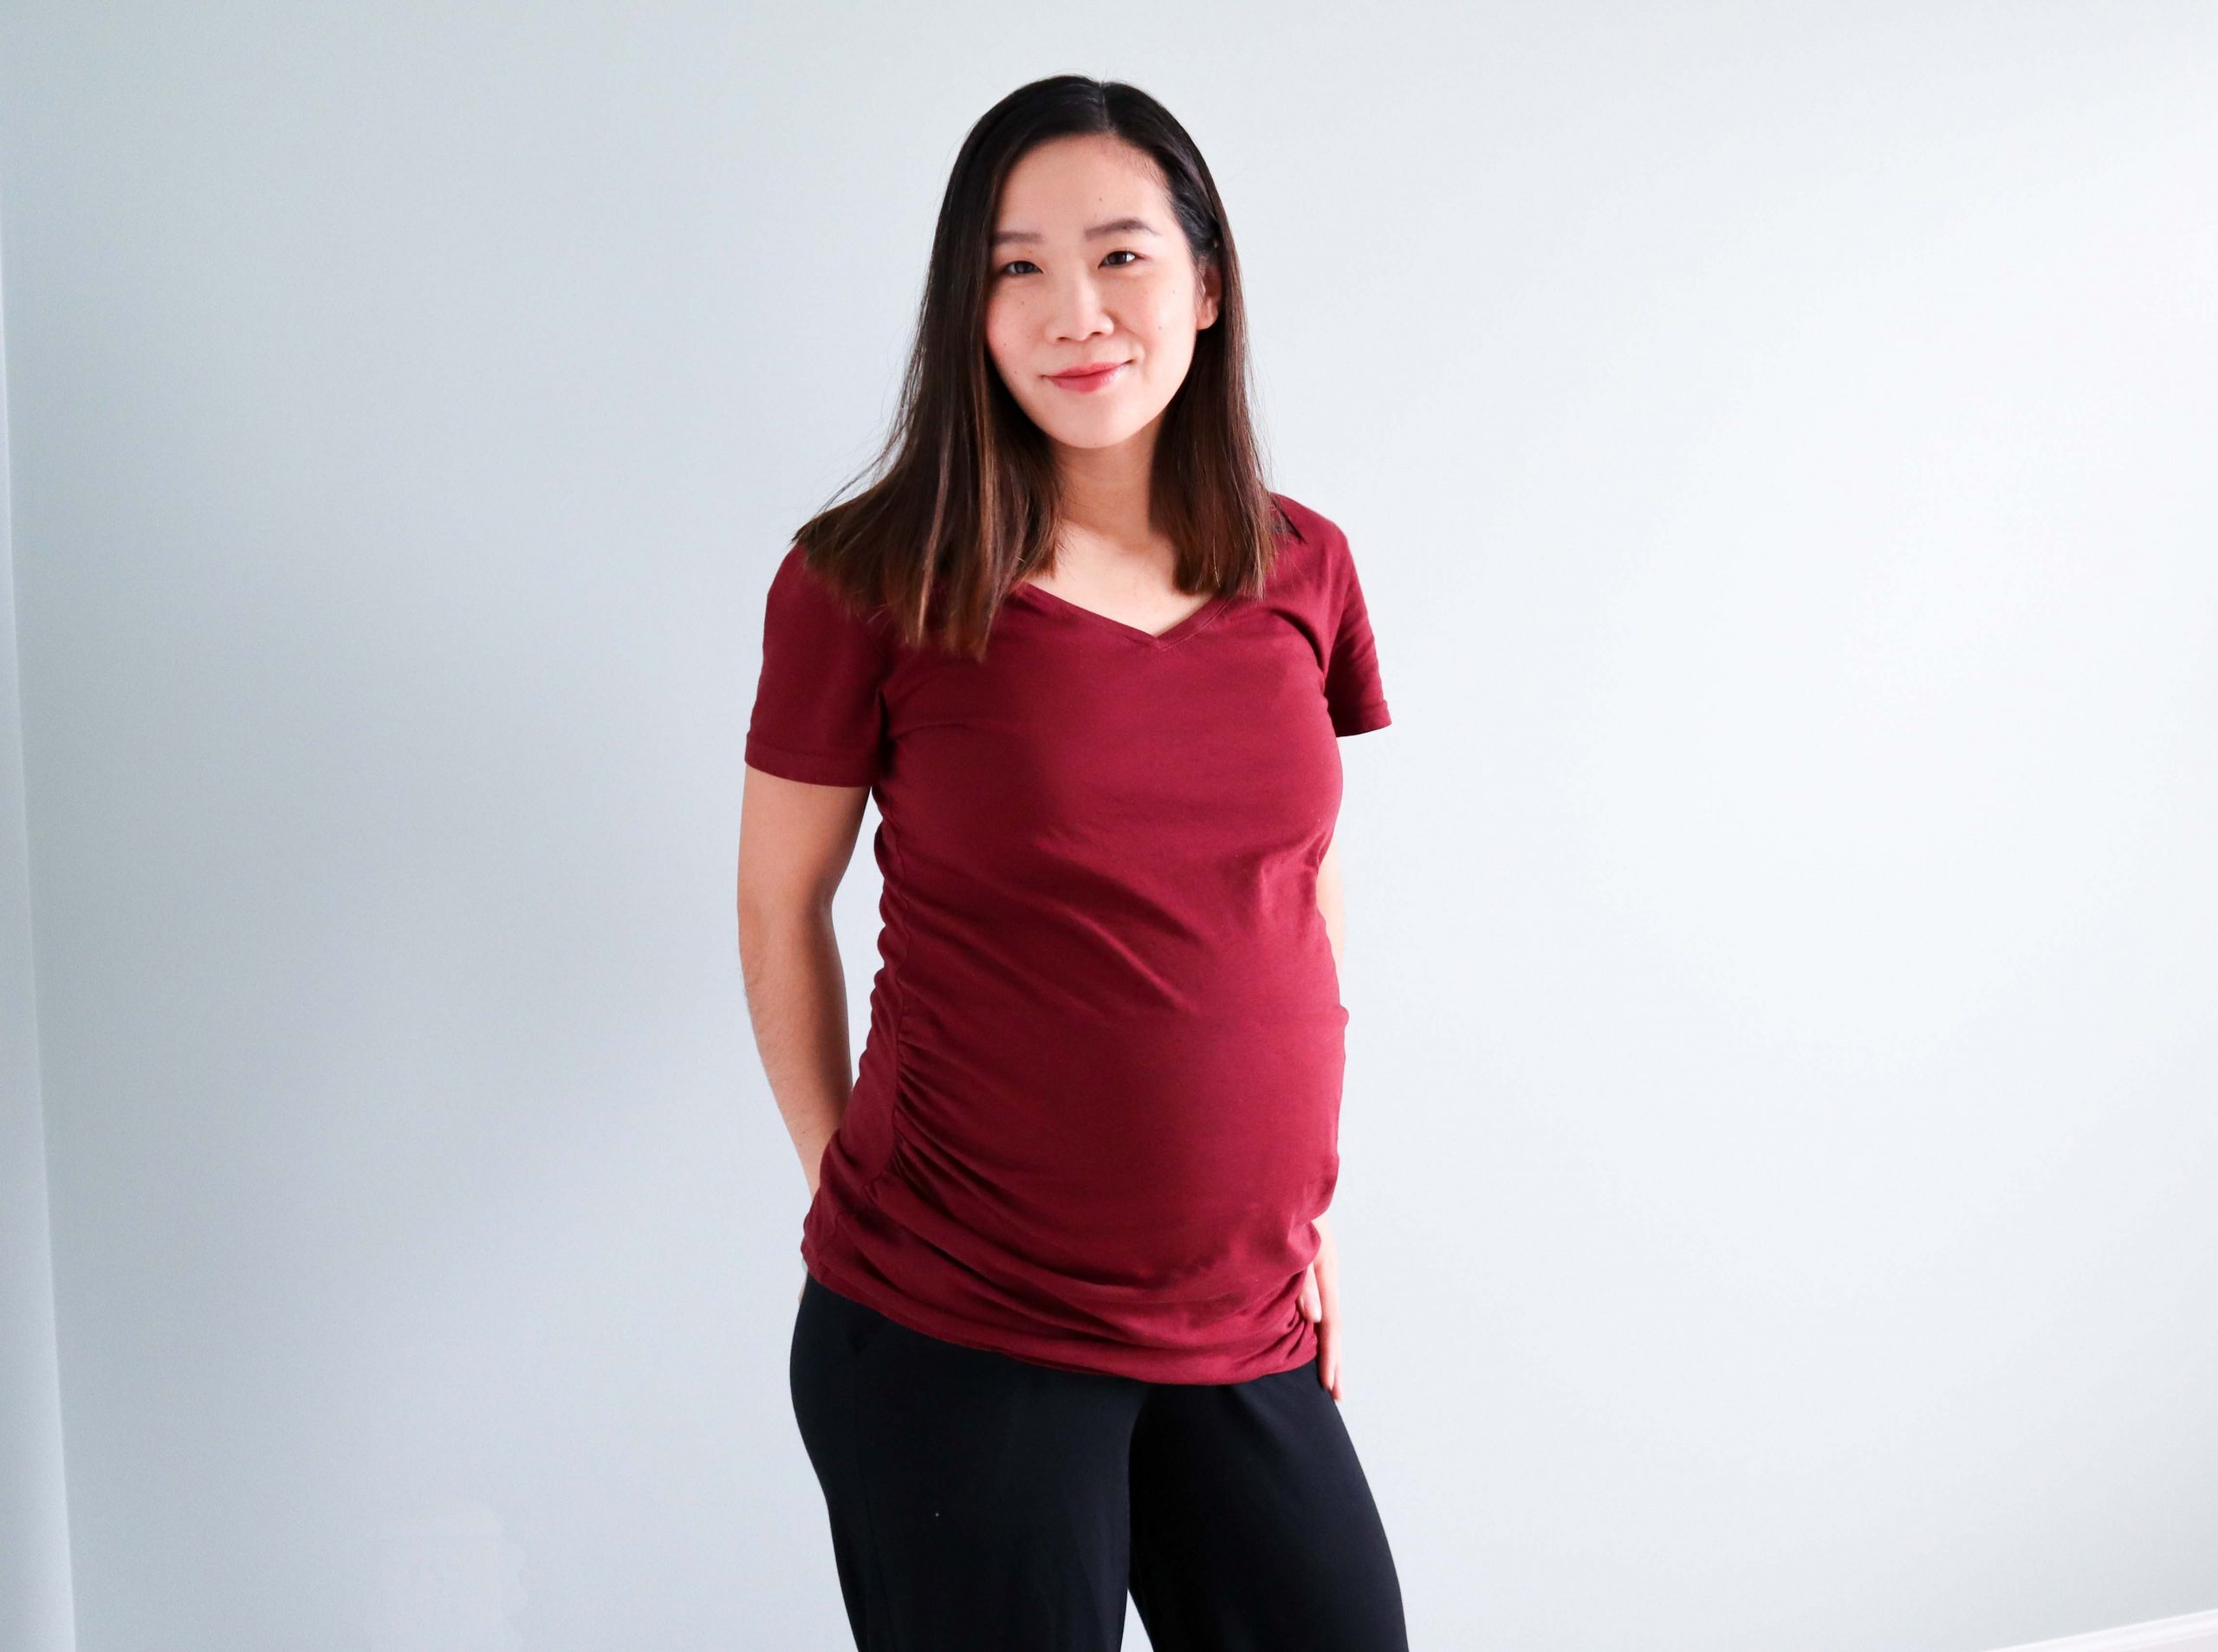 Pact Organic Women's Clothing On Sale Up To 90% Off Retail